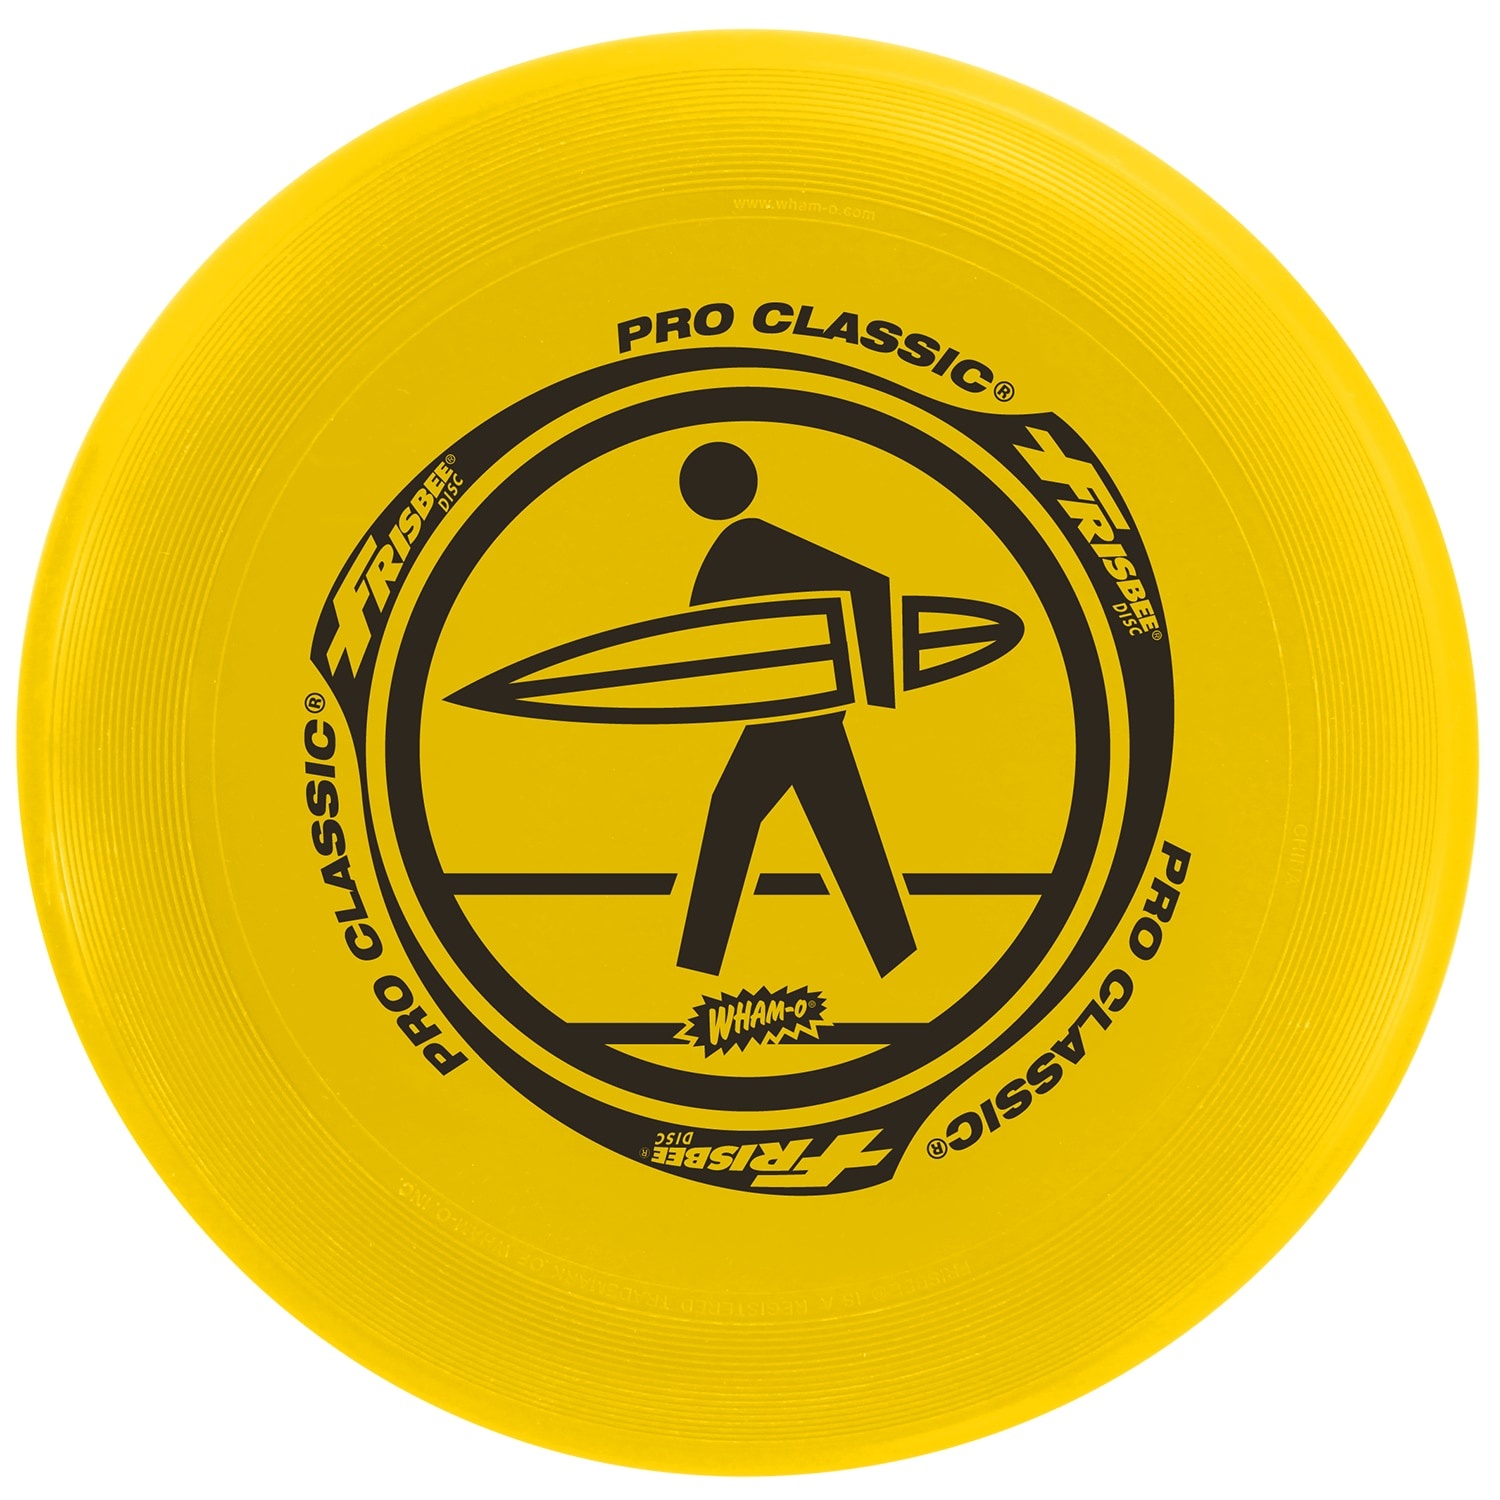 Wham-O Pro Classic 130g Yellow Frisbee High Wind Wurfscheibe